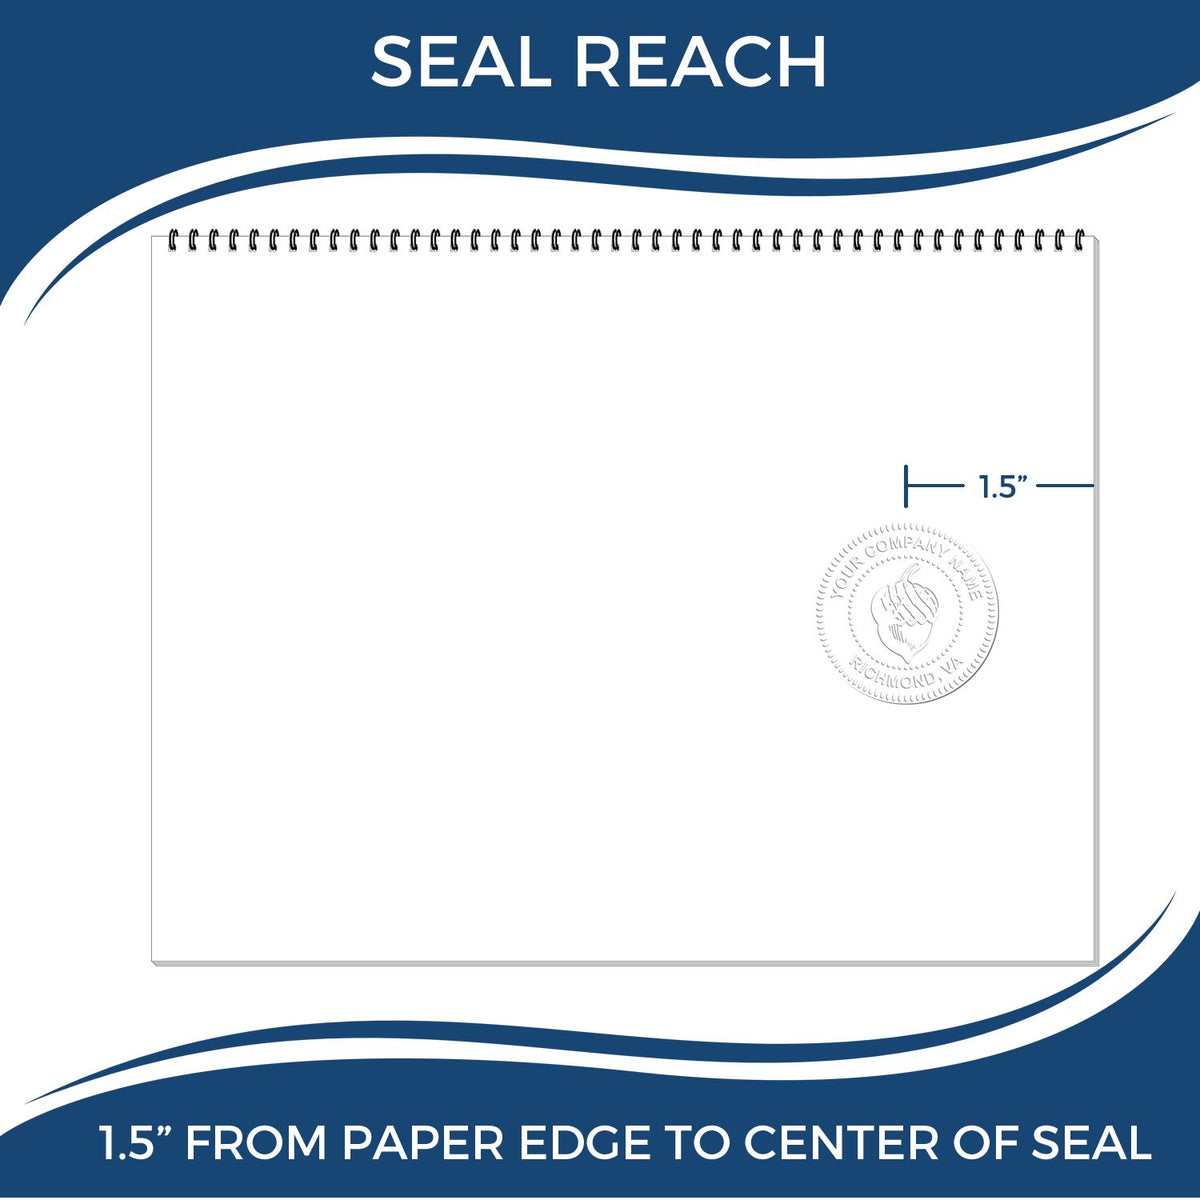 An infographic showing the seal reach which is represented by a ruler and a miniature seal image of the Alabama Desk Architect Embossing Seal